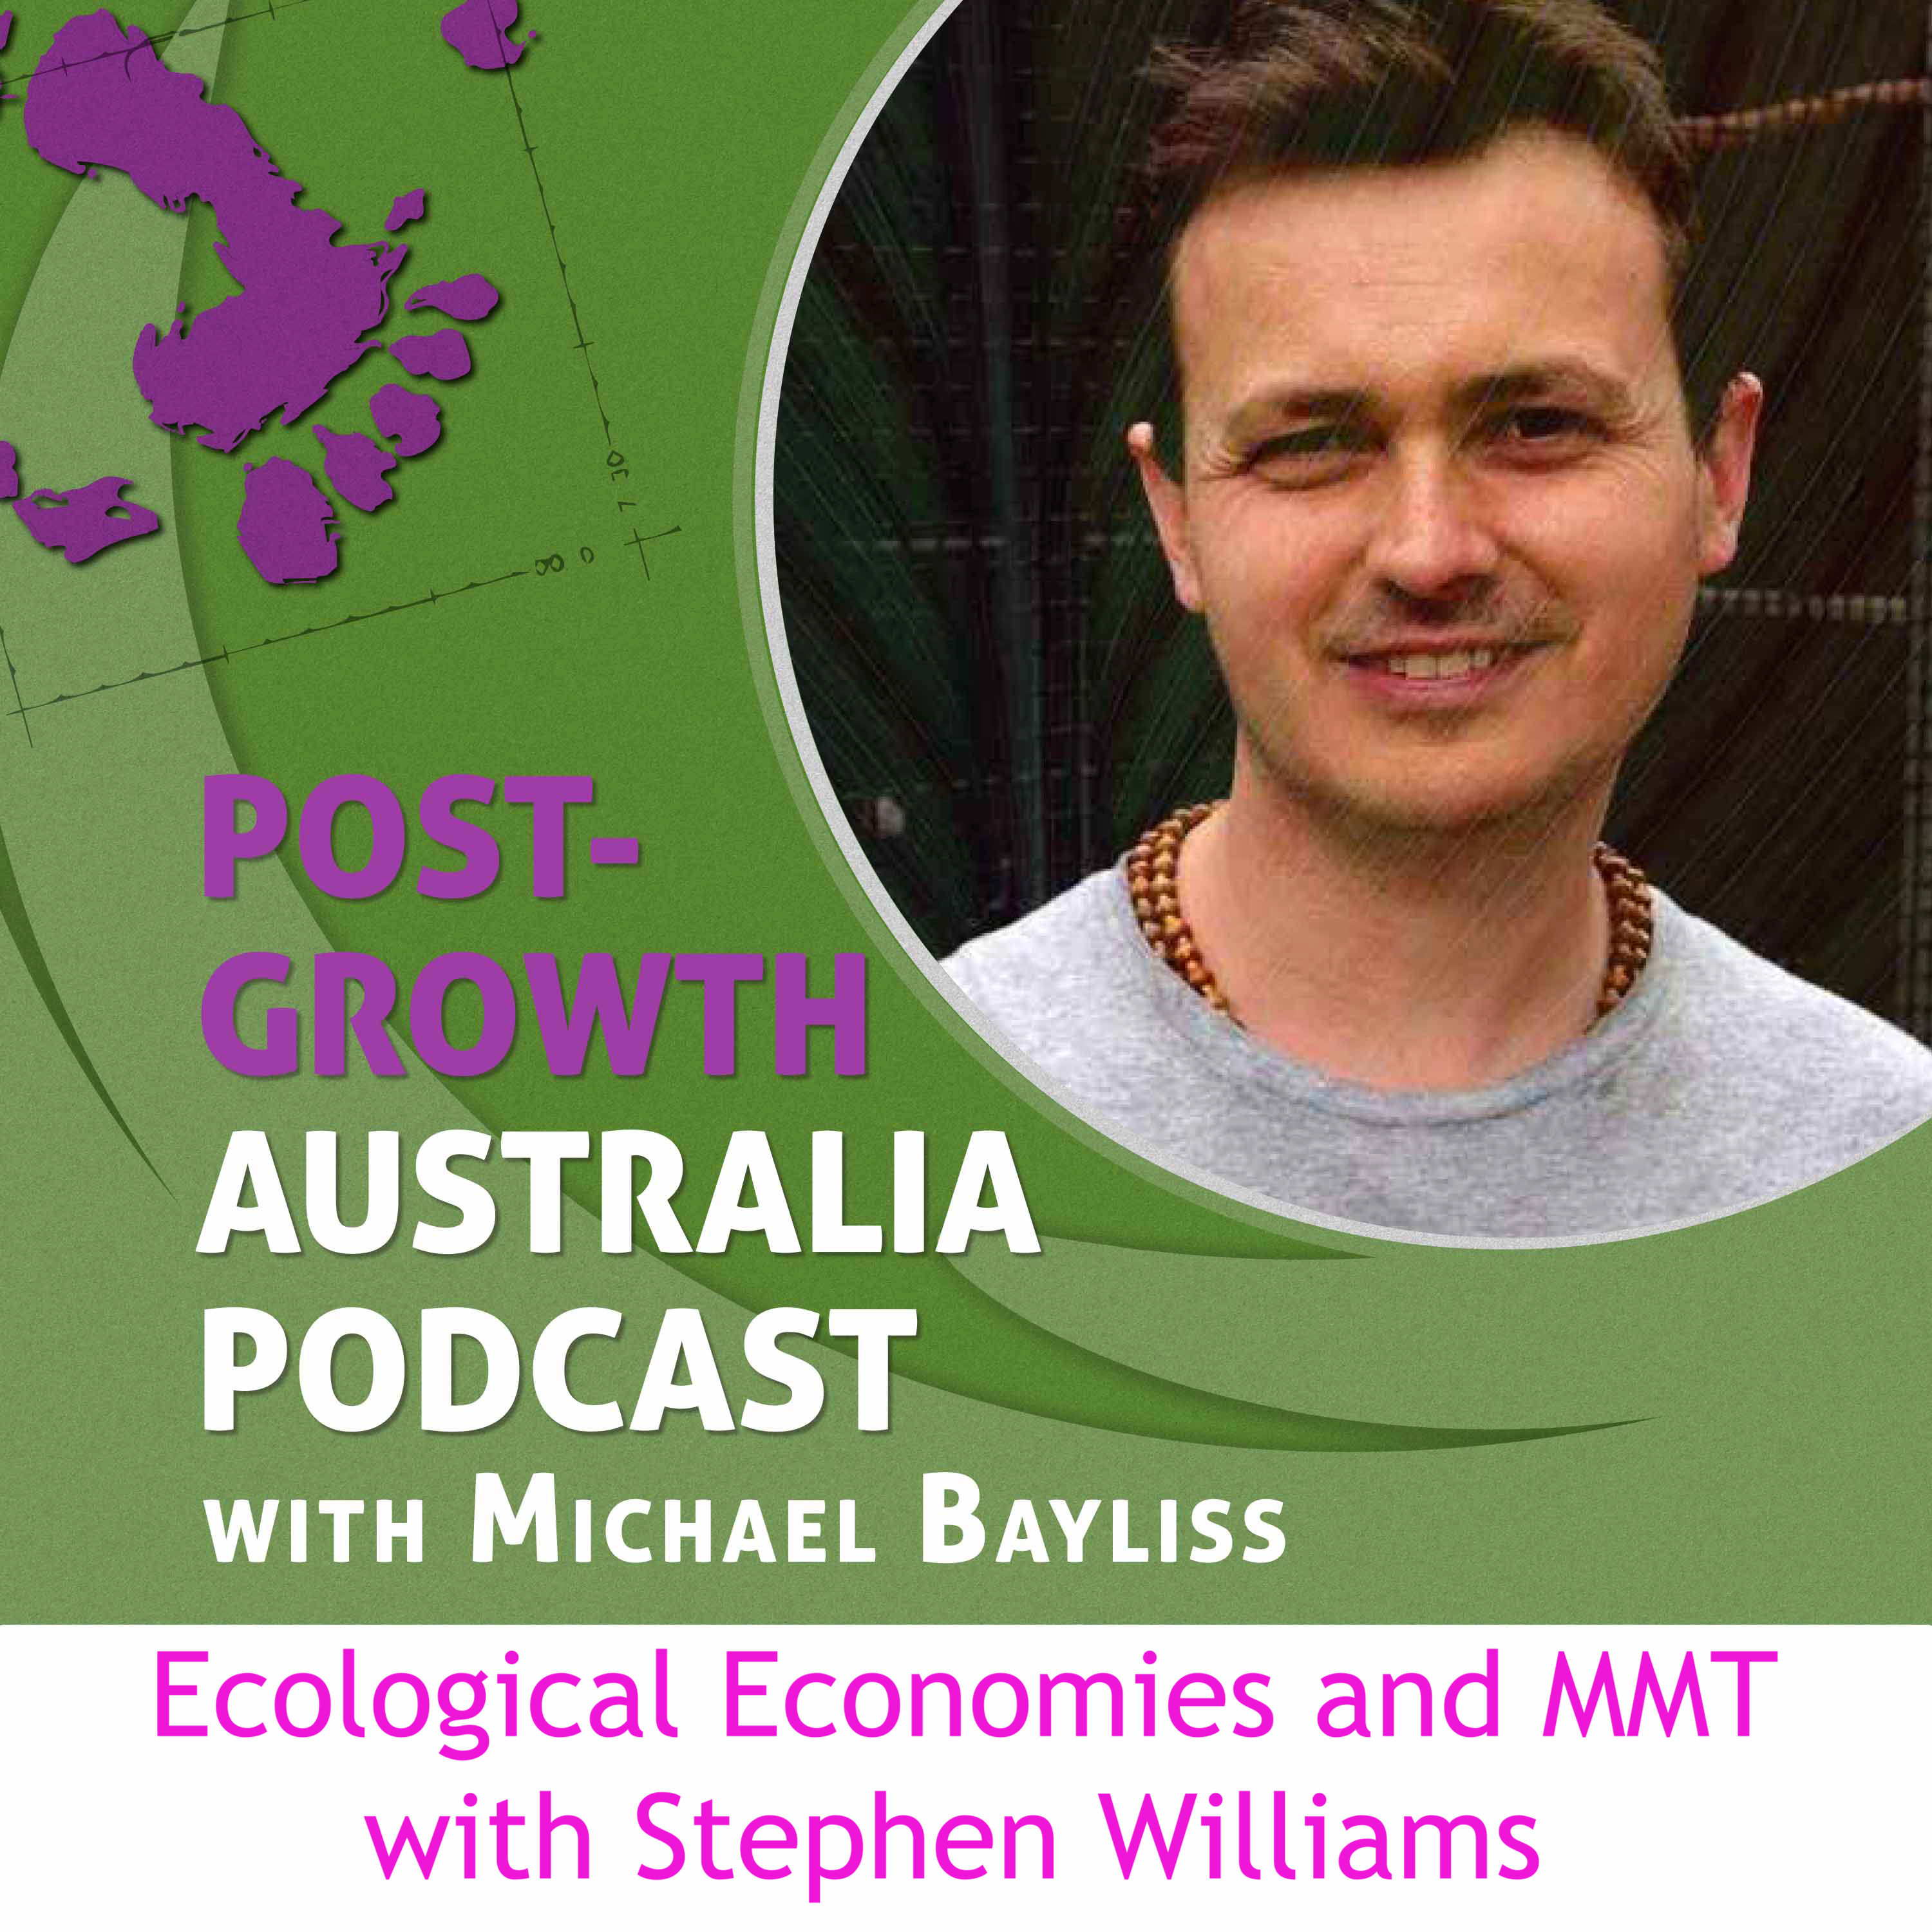 Ecological Economies and MMT with Steve Williams